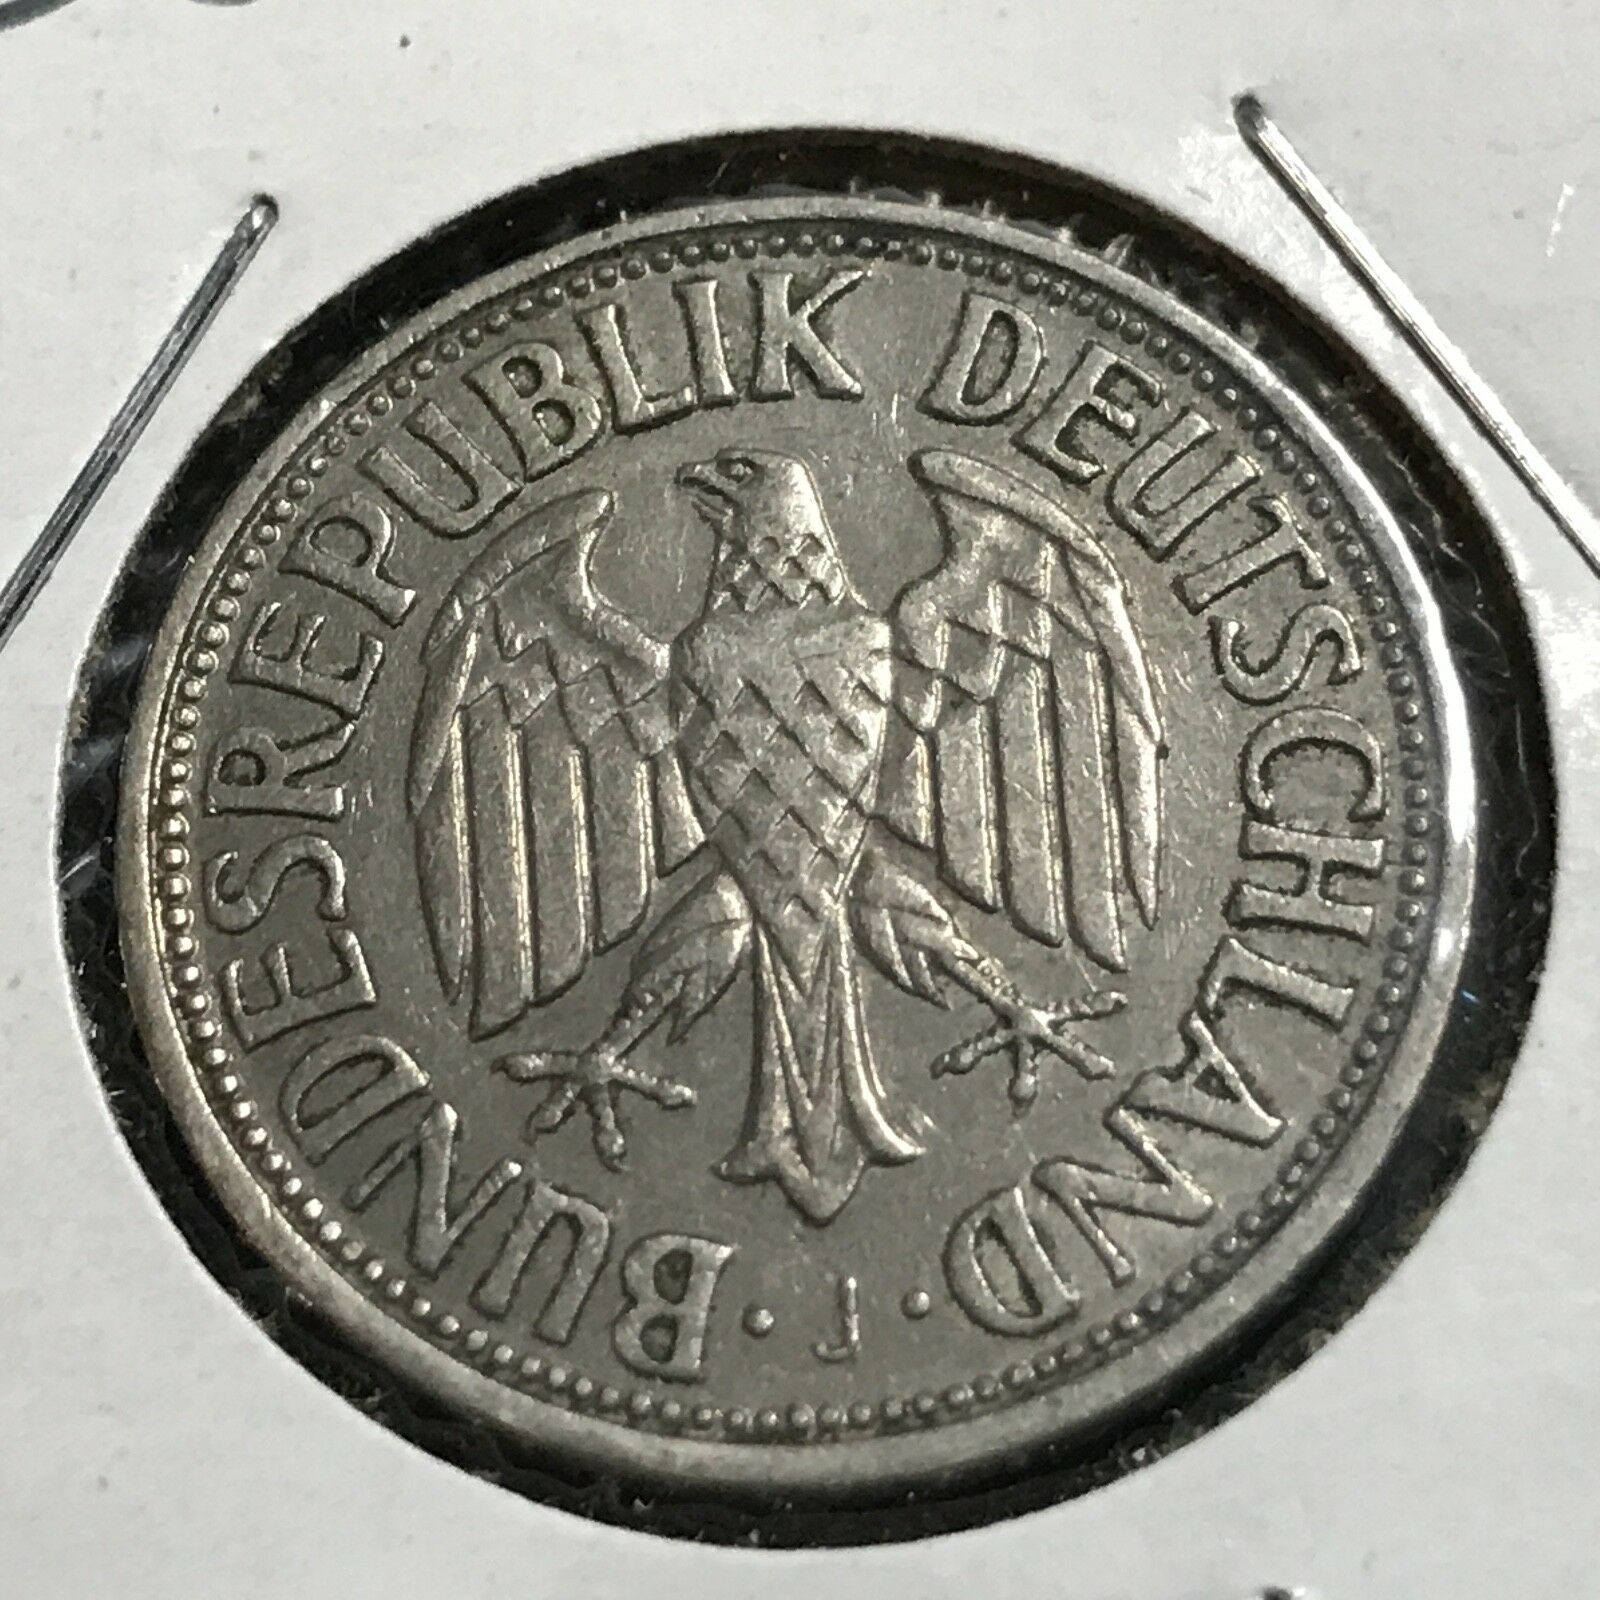 1950-j Germany 1 Mark Copper Nickel Lower Mintage Coin